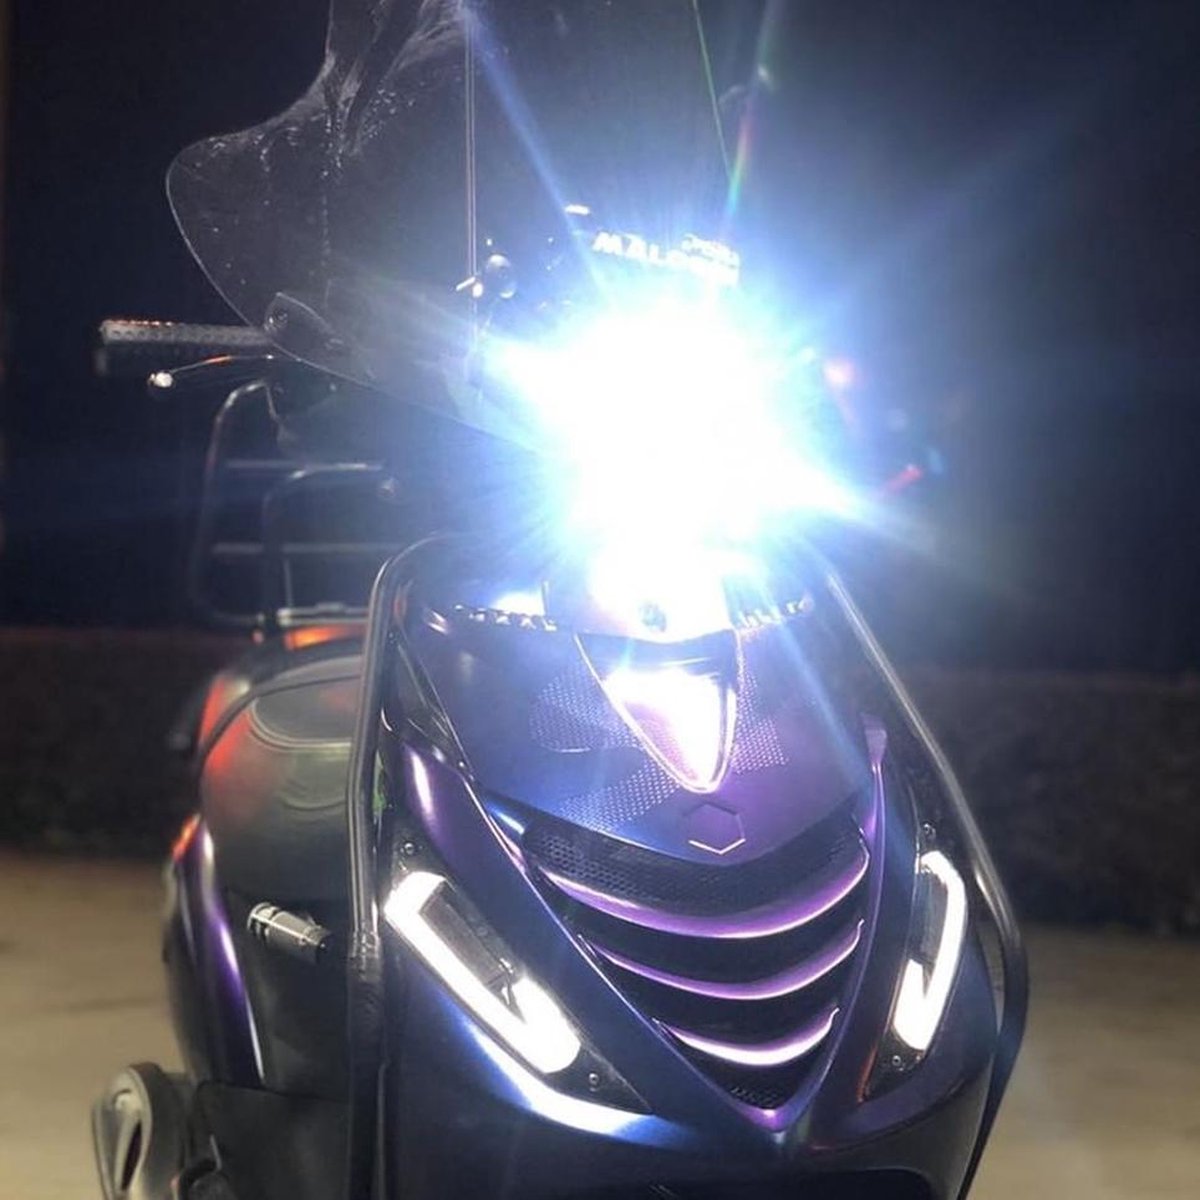 LED Piaggio - Scooter Accessoires LED-verlichting bol.com